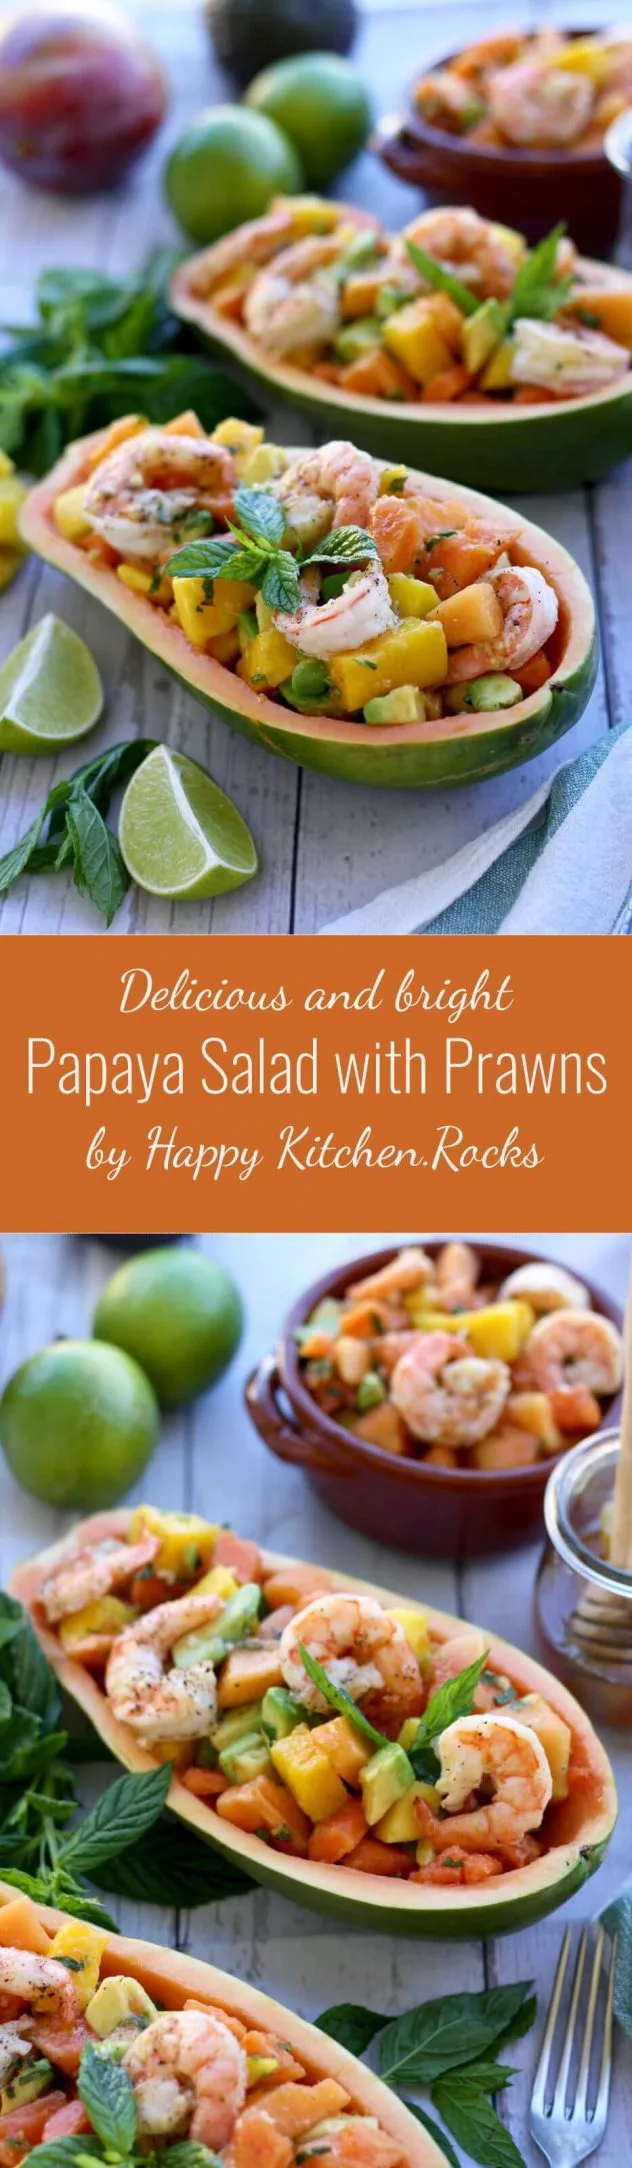 Refreshing and bright papaya salad with tropical fruits and prawn is a perfect summer salad recipe. Easy to make, gluten free, dairy-free, paleo, healthy and full of flavor!